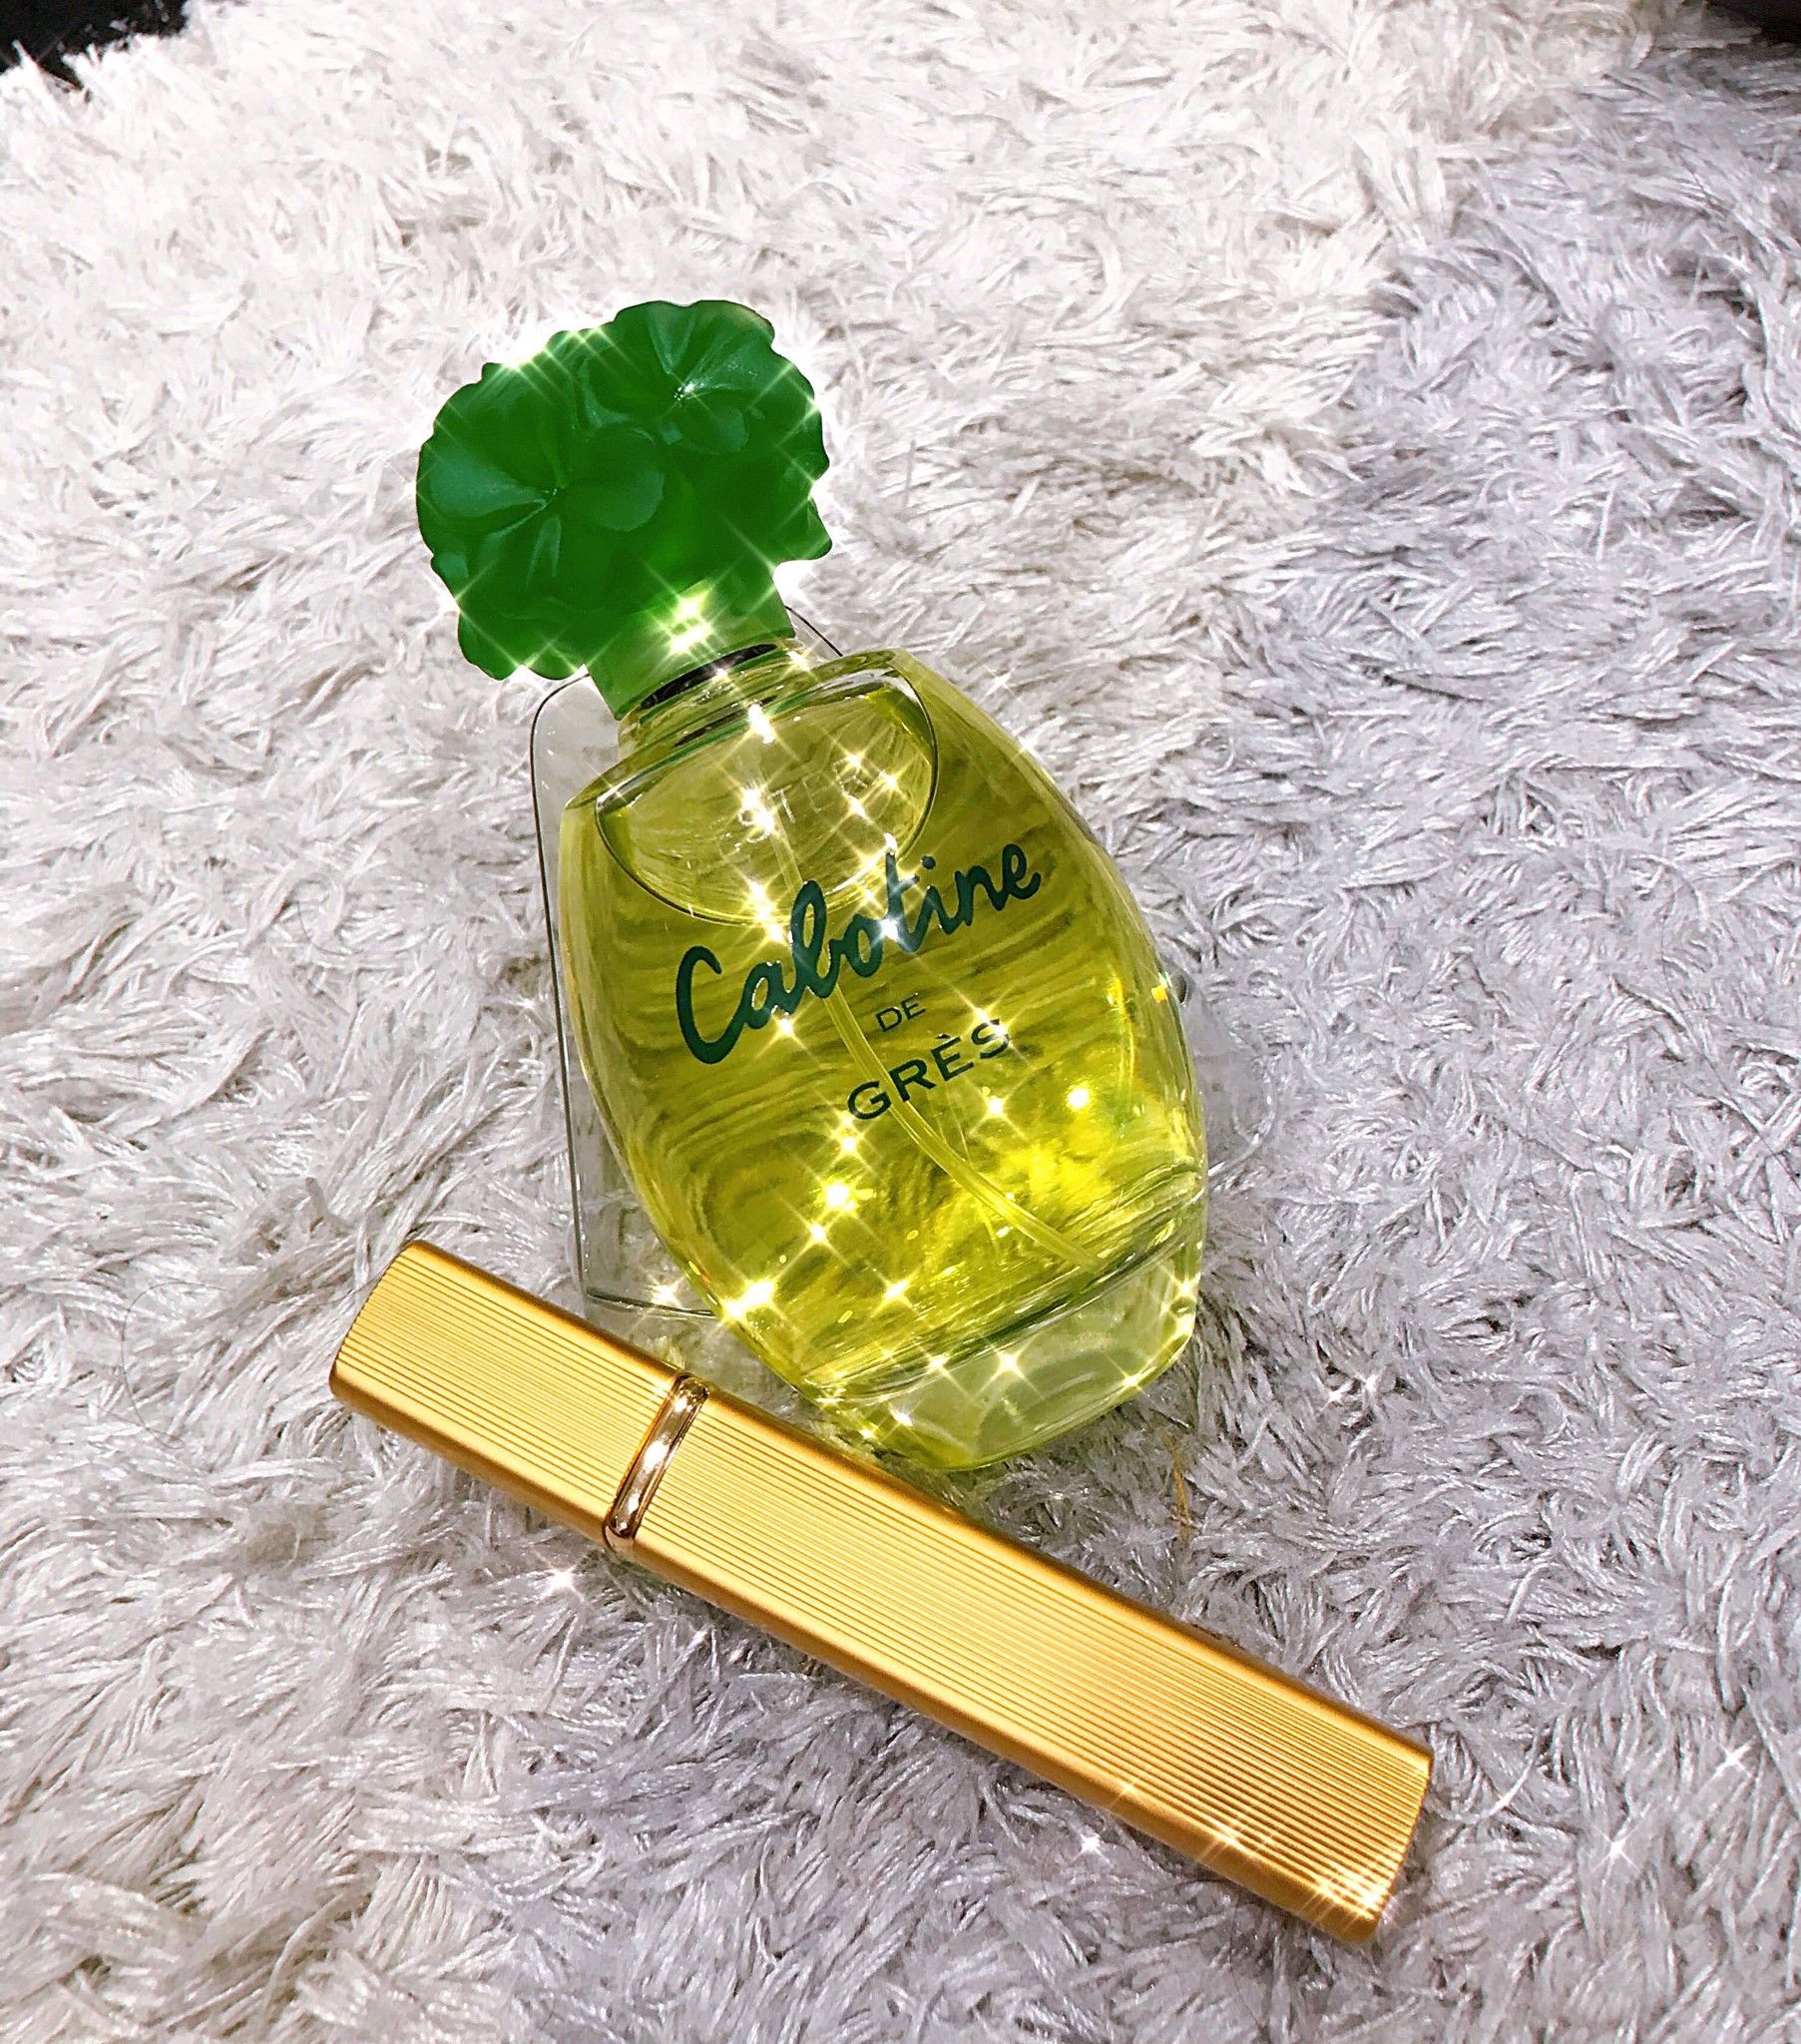  Cabotine by Parfums Gres EDT [10 ml] 